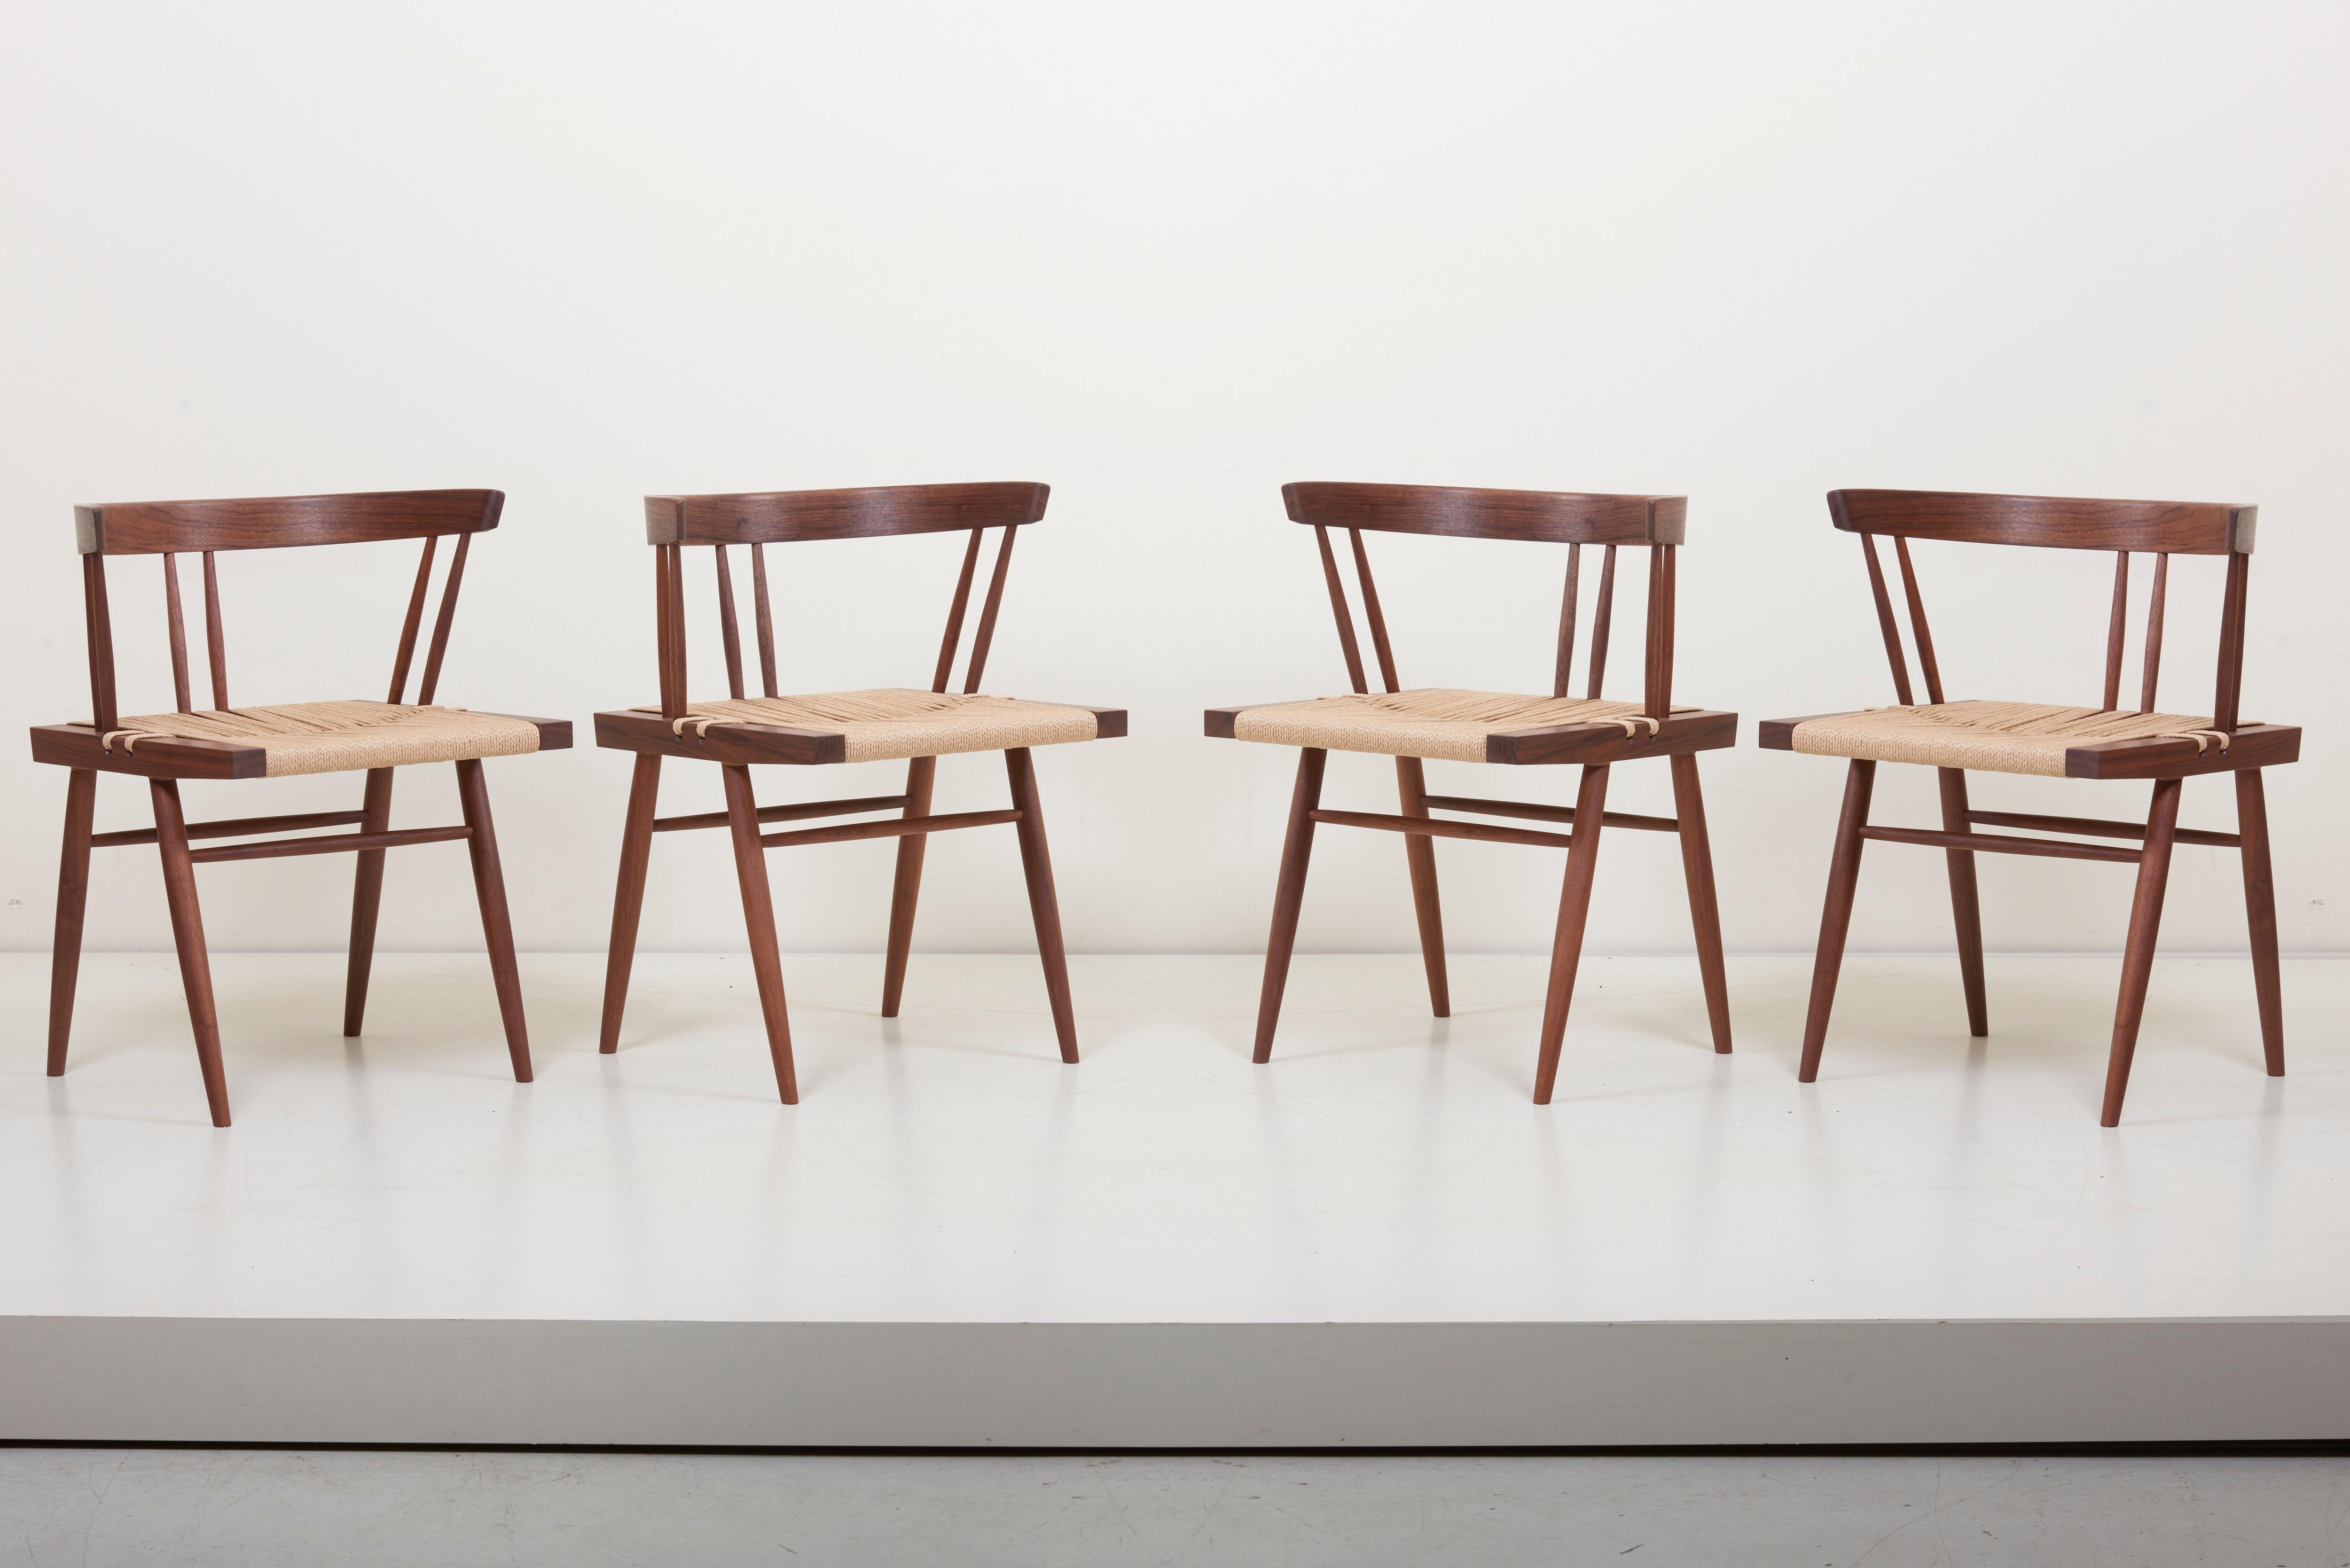 Set of 6 Grass-seated chairs, designed by George Nakashima and manufactured by George Nakashima Studio in the US. The square seat typically found in walnut and woven sea-grass. Outstanding quality.